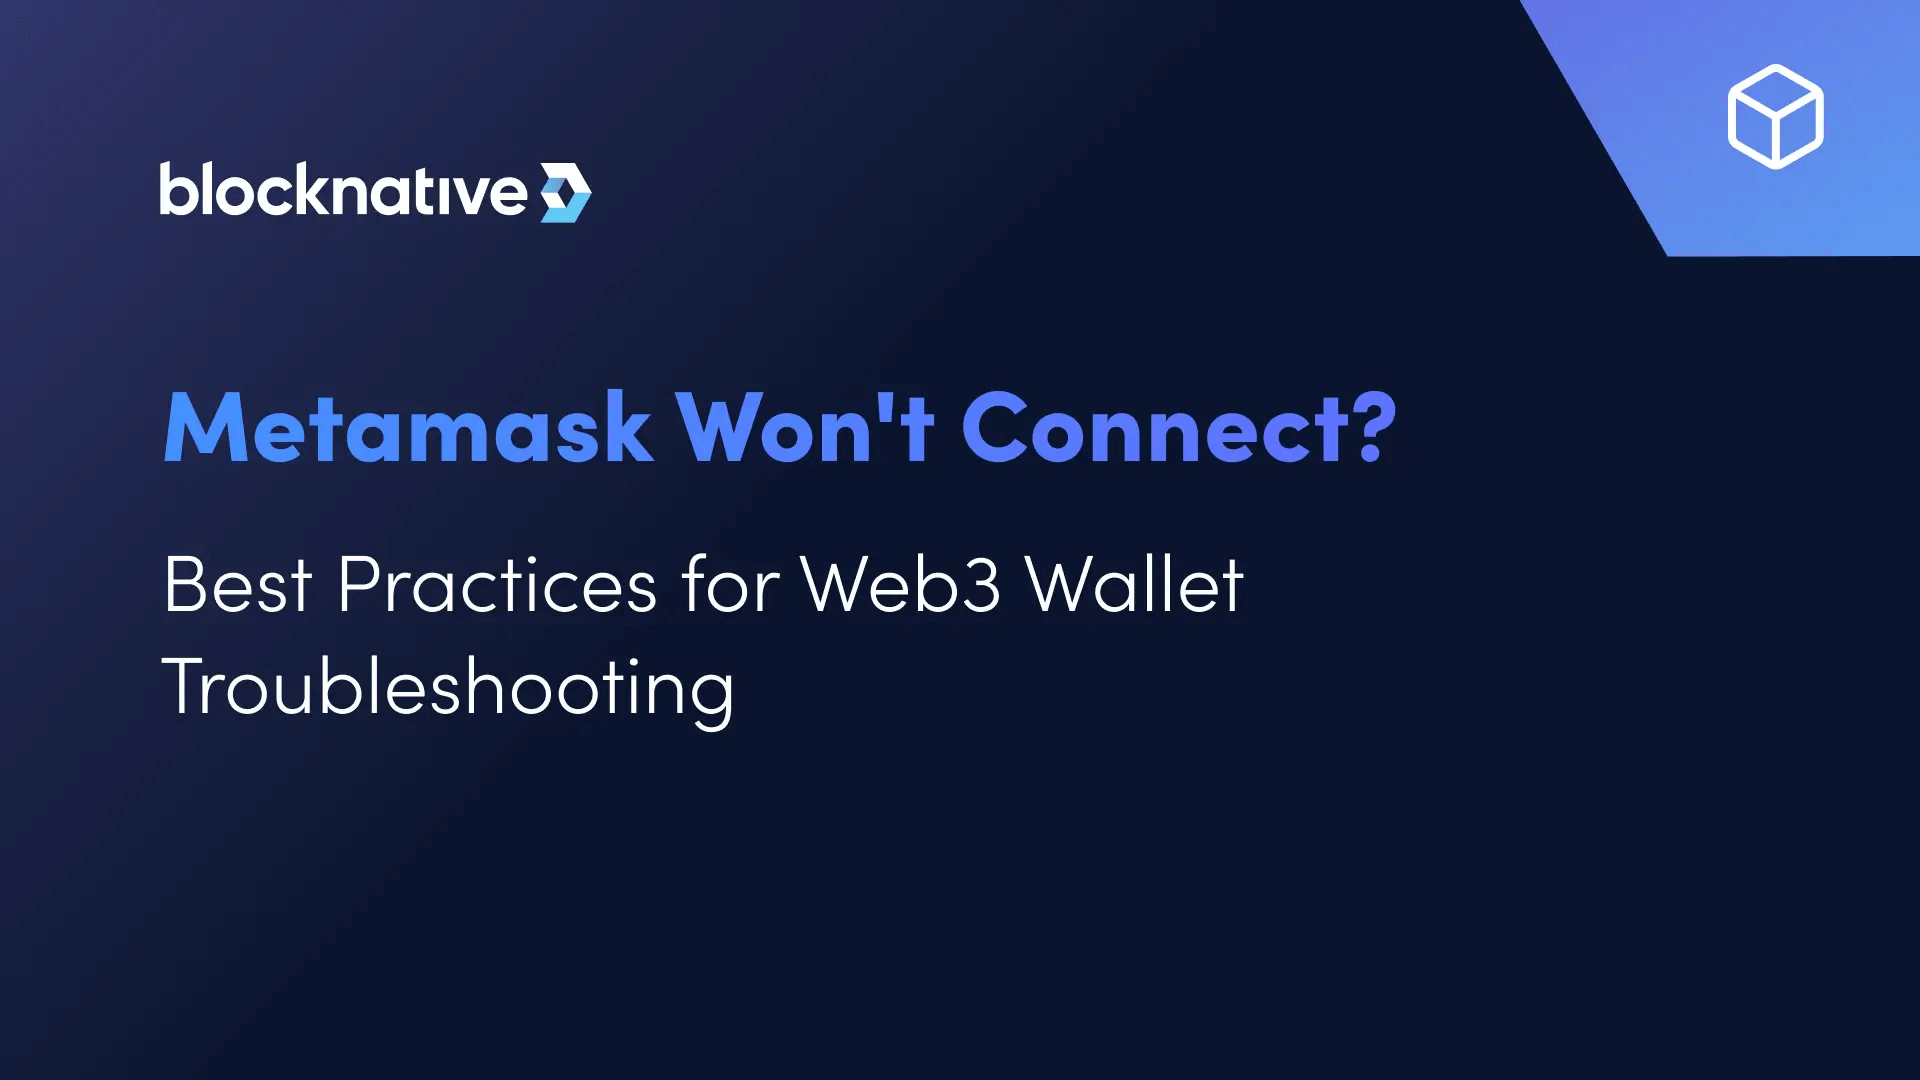 Metamask Won't Connect? Best Practices for Web3 Wallet Troubleshooting